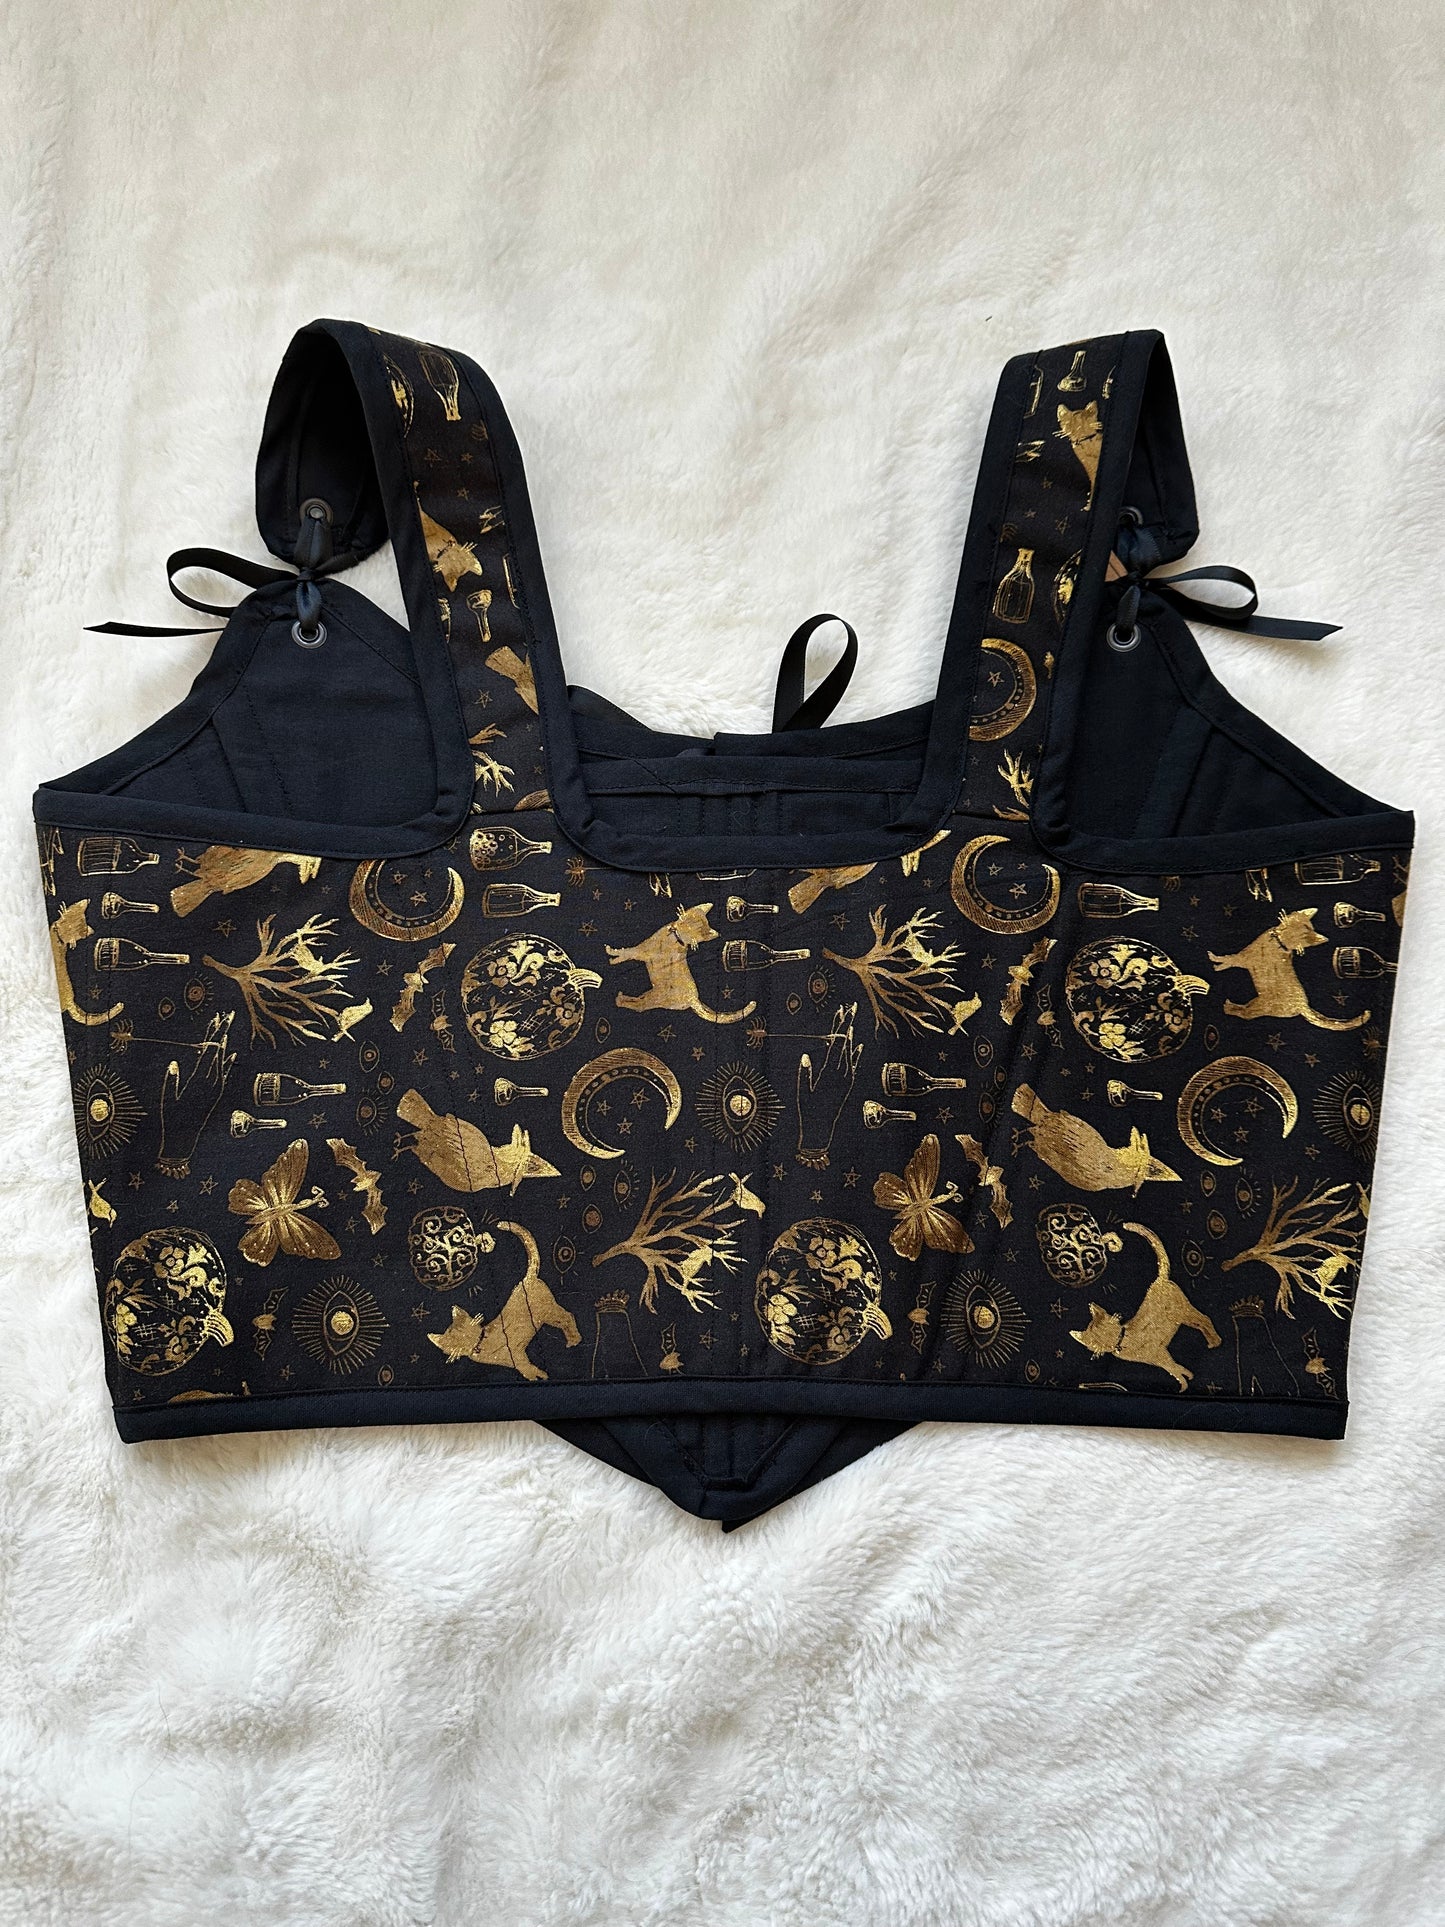 Back view of renaissance bodice in black fabric with gold patterned print. Pattern contains cats, trees, moons, bottles, and moths in gold. Black ribbon connects the bodice to the straps. Bodice is on a white fuzzy blanket.